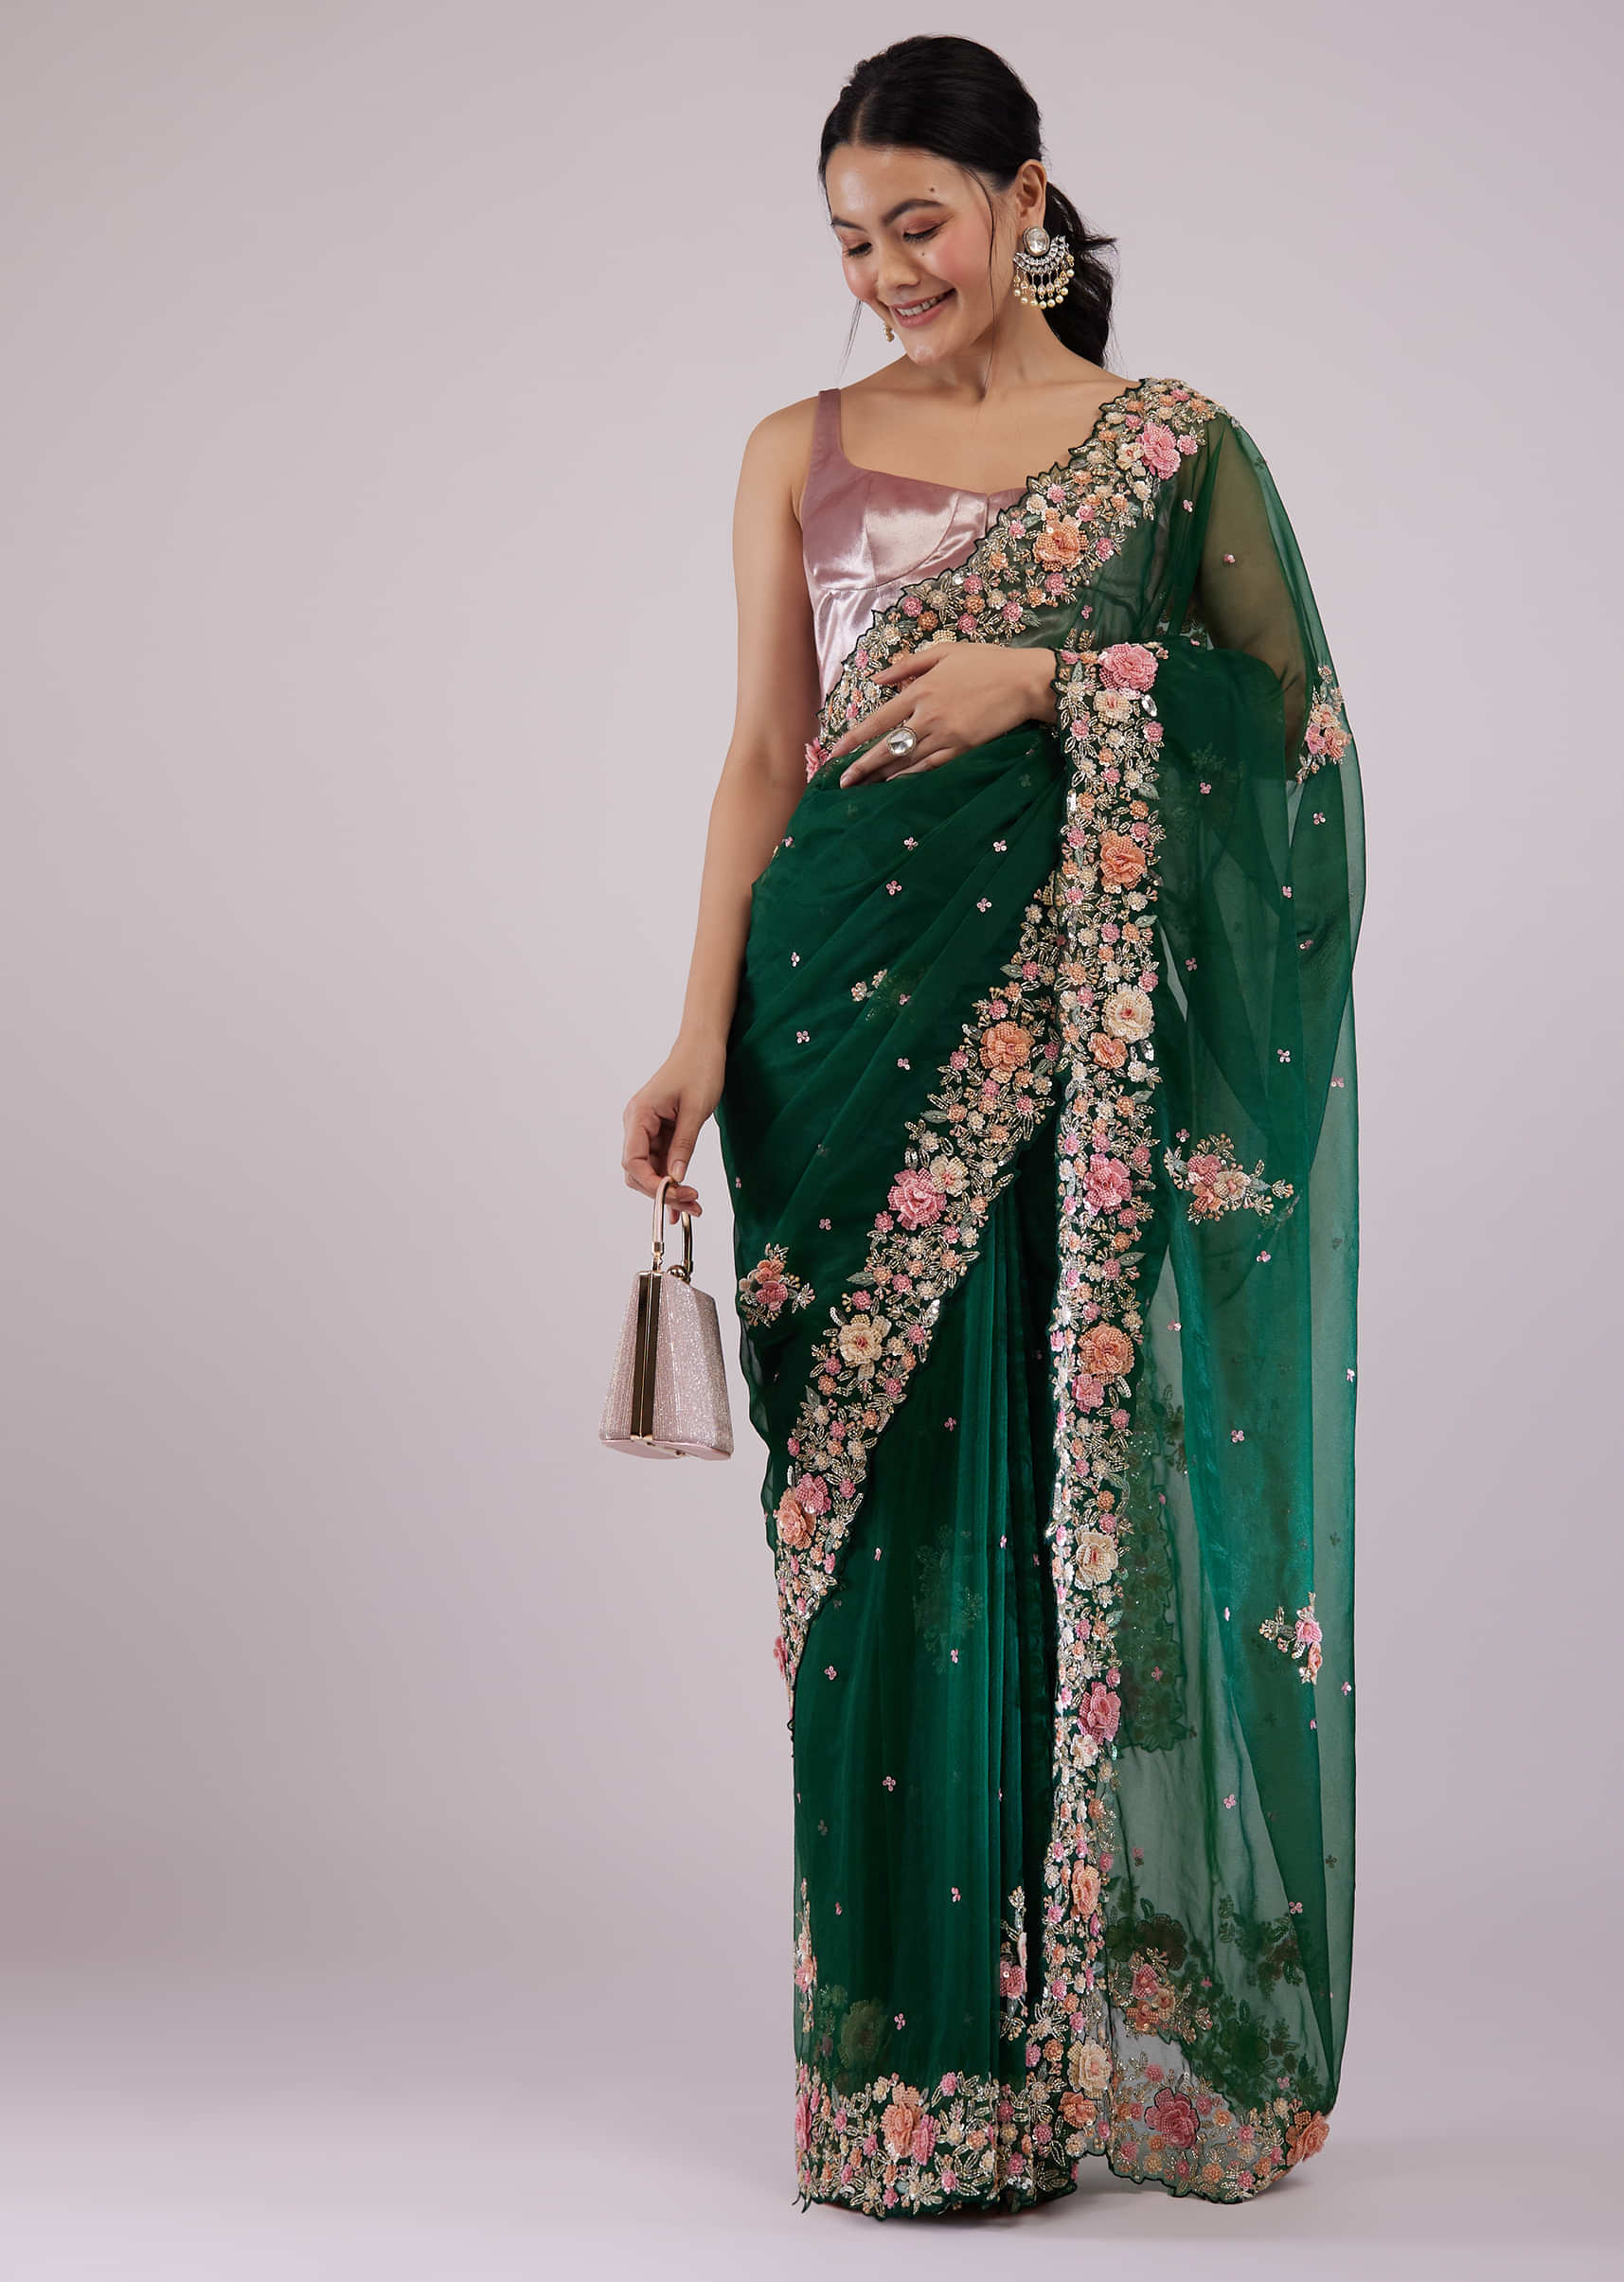 Bottle Green Organza Saree With Exquisite Embroidery